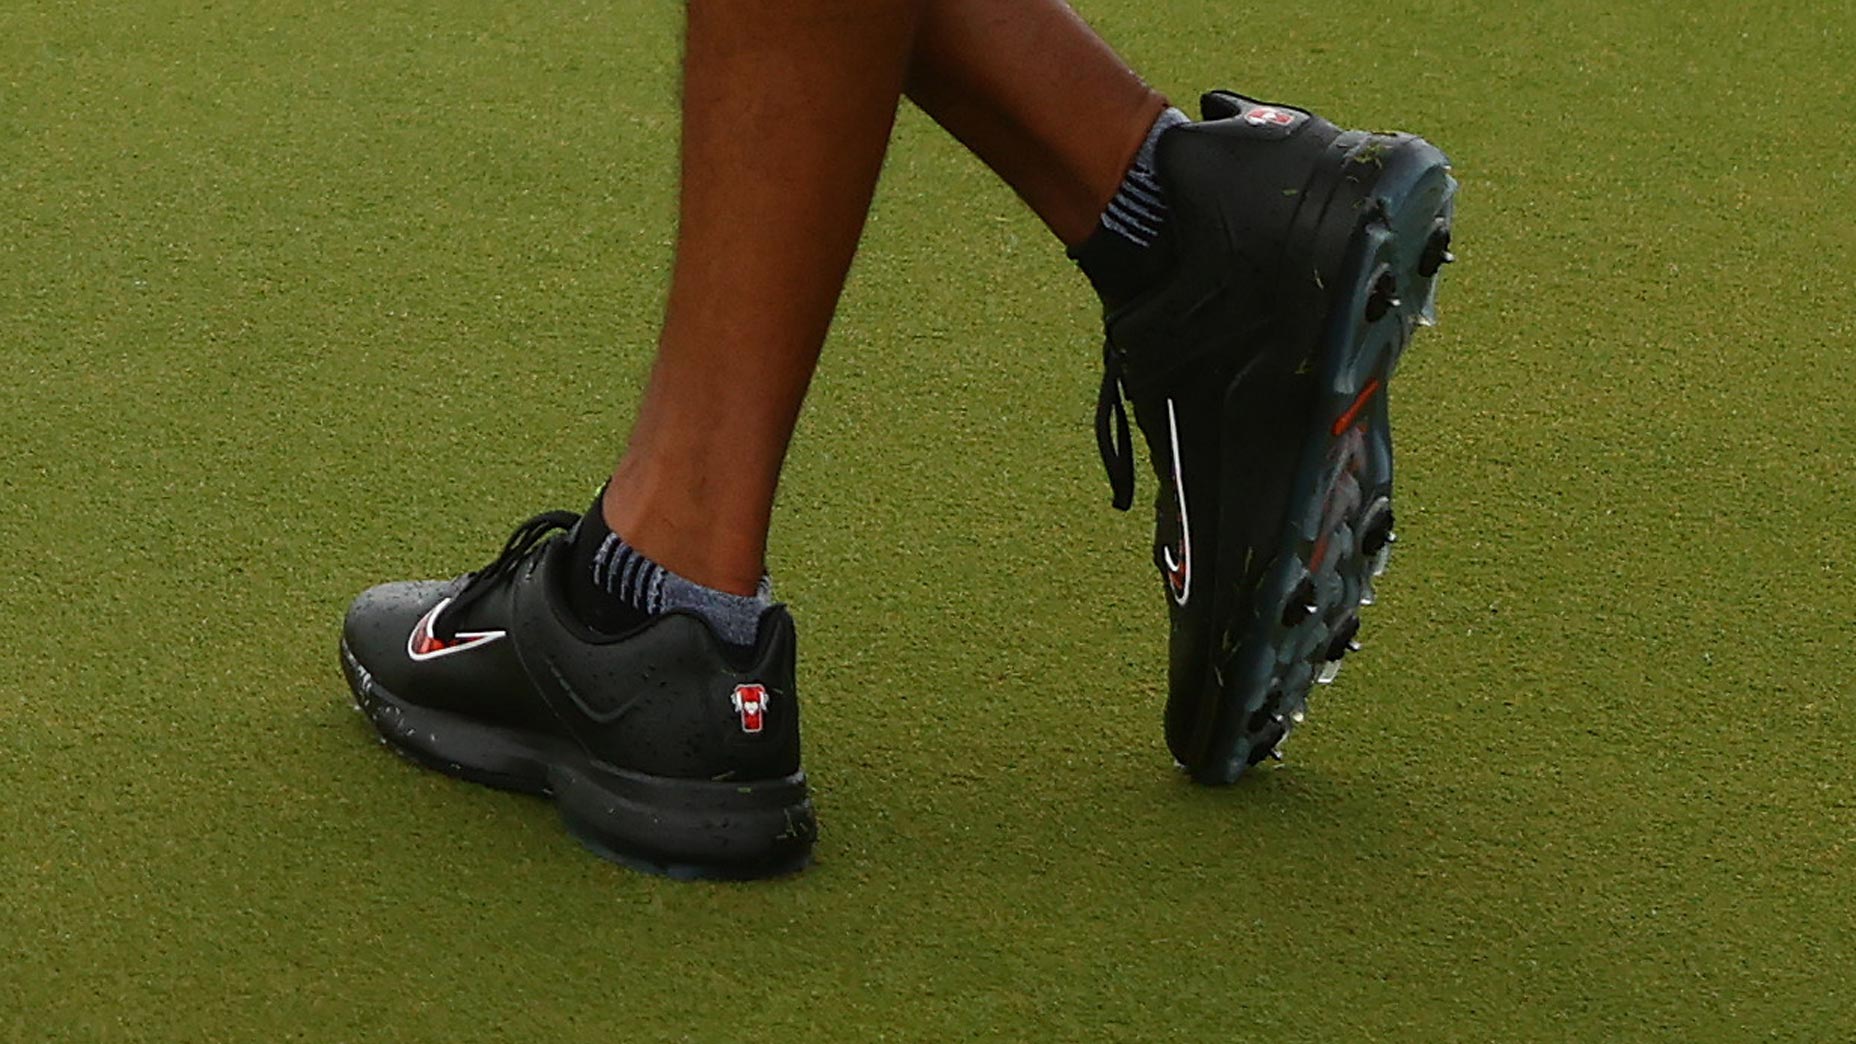 Todos los años Pronombre carga Tiger Woods flashed new 'Frank' golf shoes at Match II. Are they available?